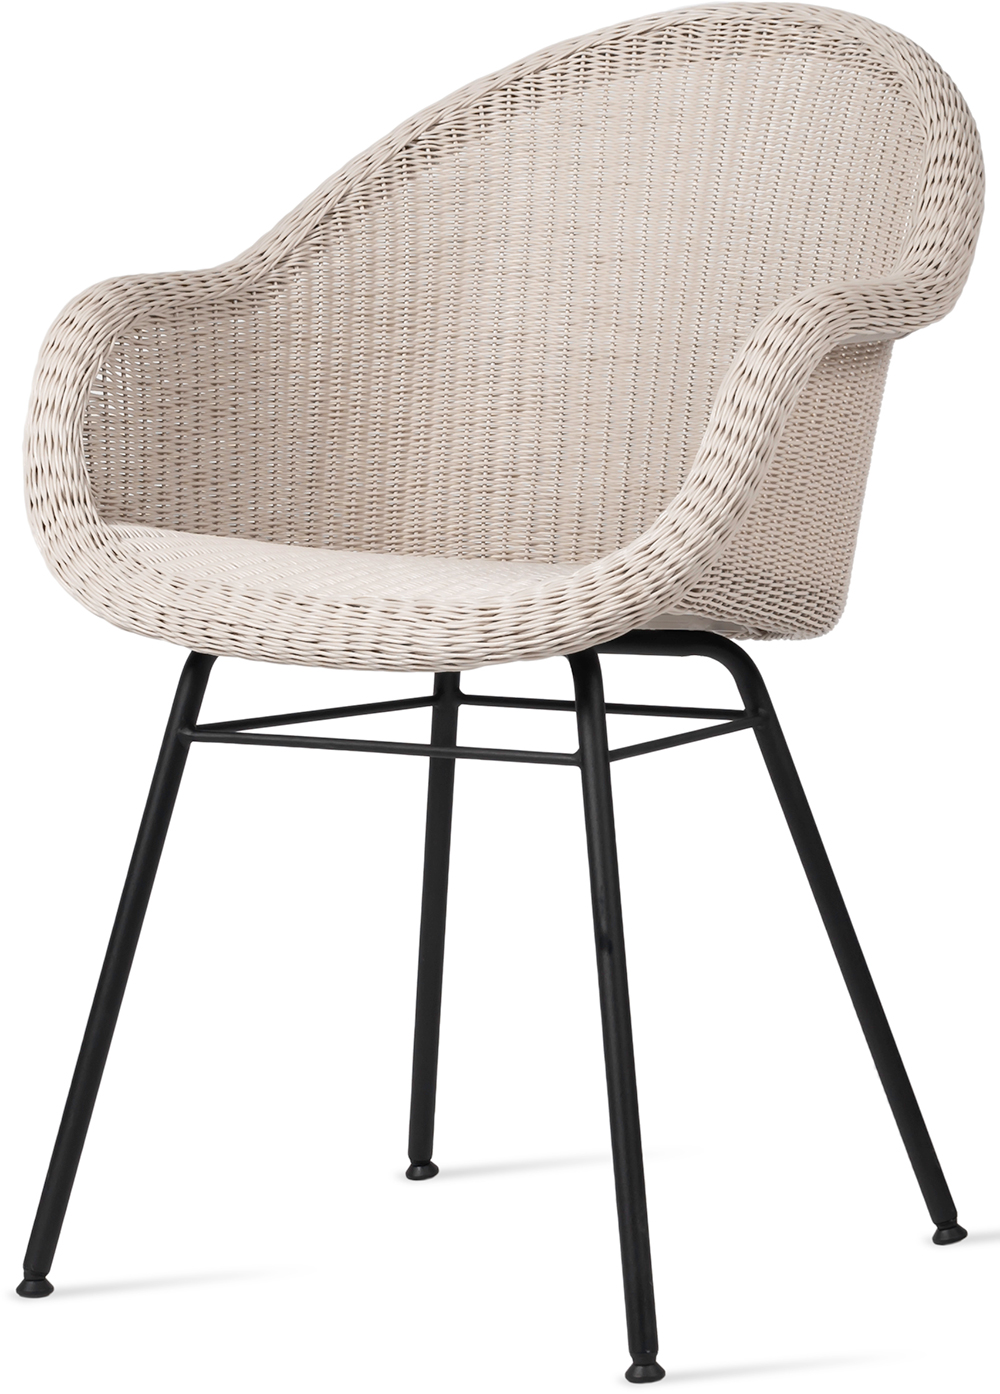 Vincent Sheppard Edgard Dining Chair Steel A Base Old Lace